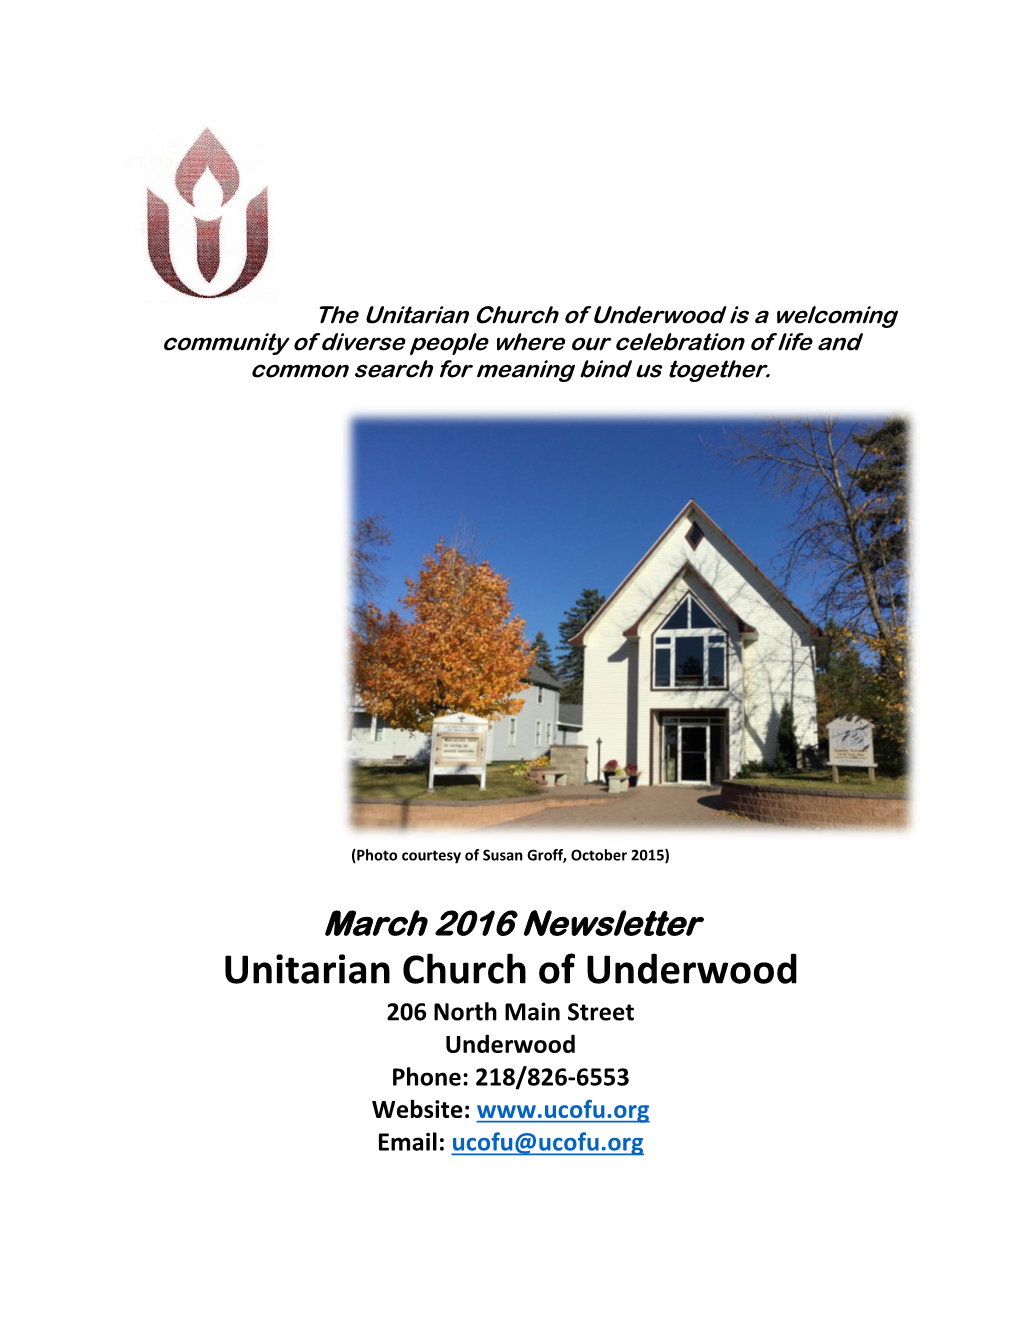 The Unitarian Church of Underwood Is a Welcoming Community of Diverse People Where Our Celebration of Life and Common Search for Meaning Bind Us Together